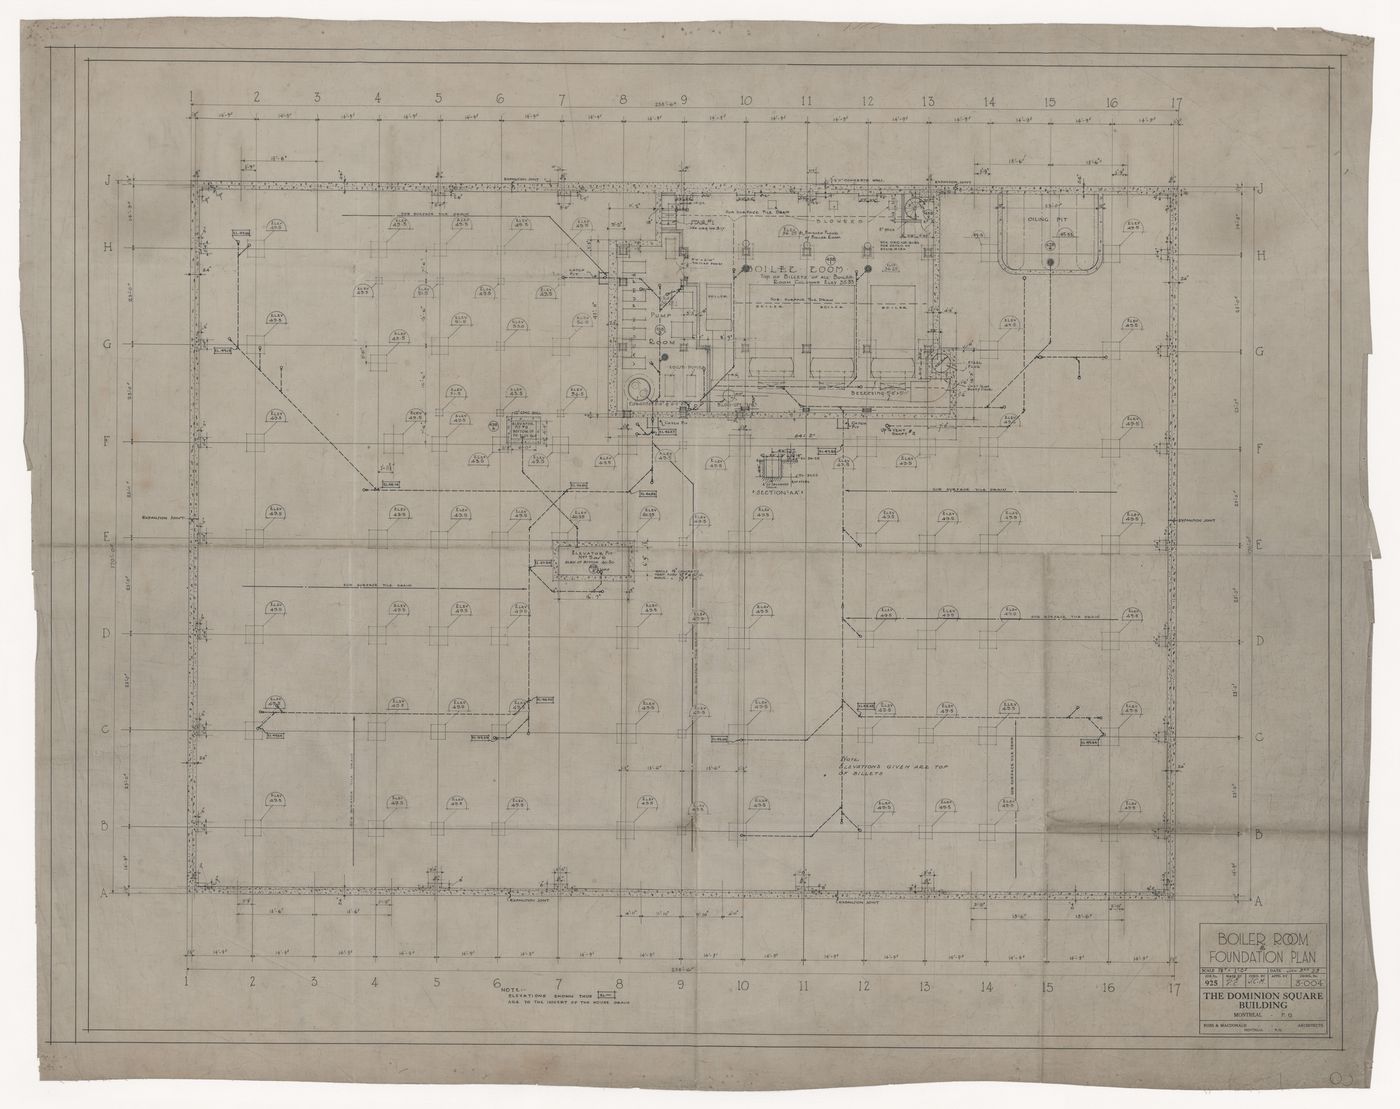 Boiler room and foundation plan for Dominion Square Building, Montreal, Québec